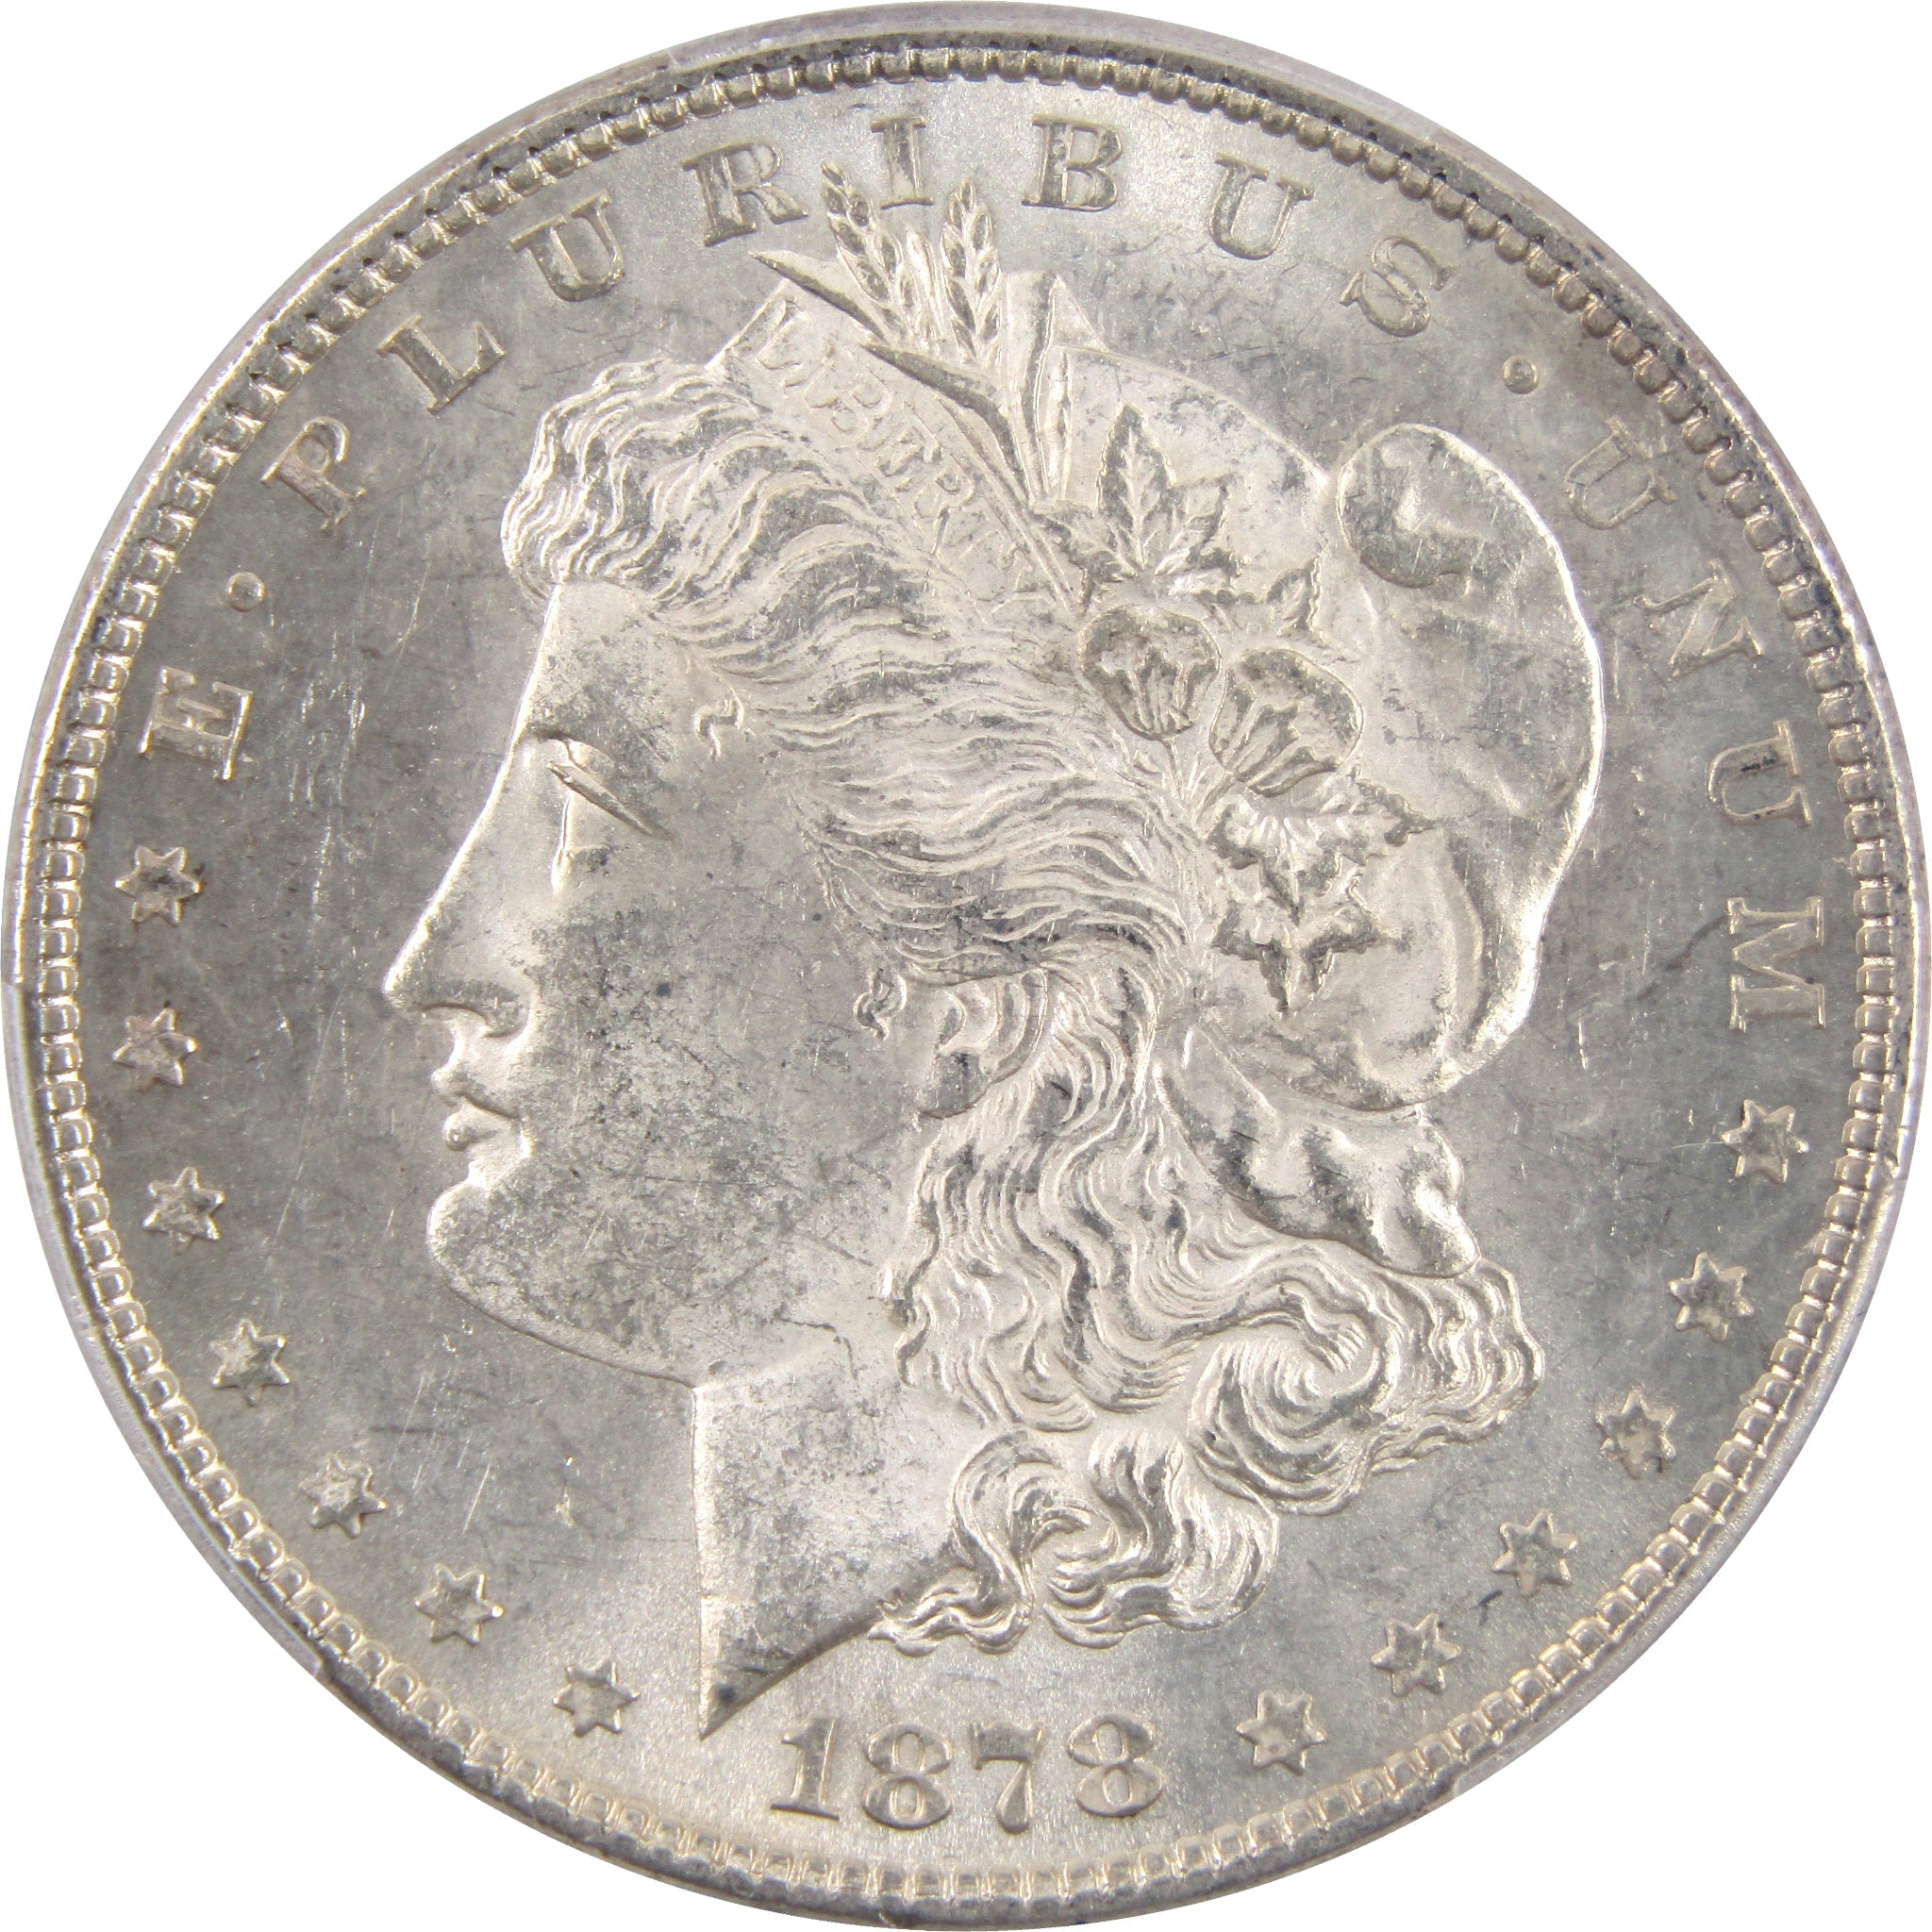 1878 7/8TF Strong Morgan Dollar MS 62 PCGS 90% Silver SKU:I2645 - Morgan coin - Morgan silver dollar - Morgan silver dollar for sale - Profile Coins &amp; Collectibles